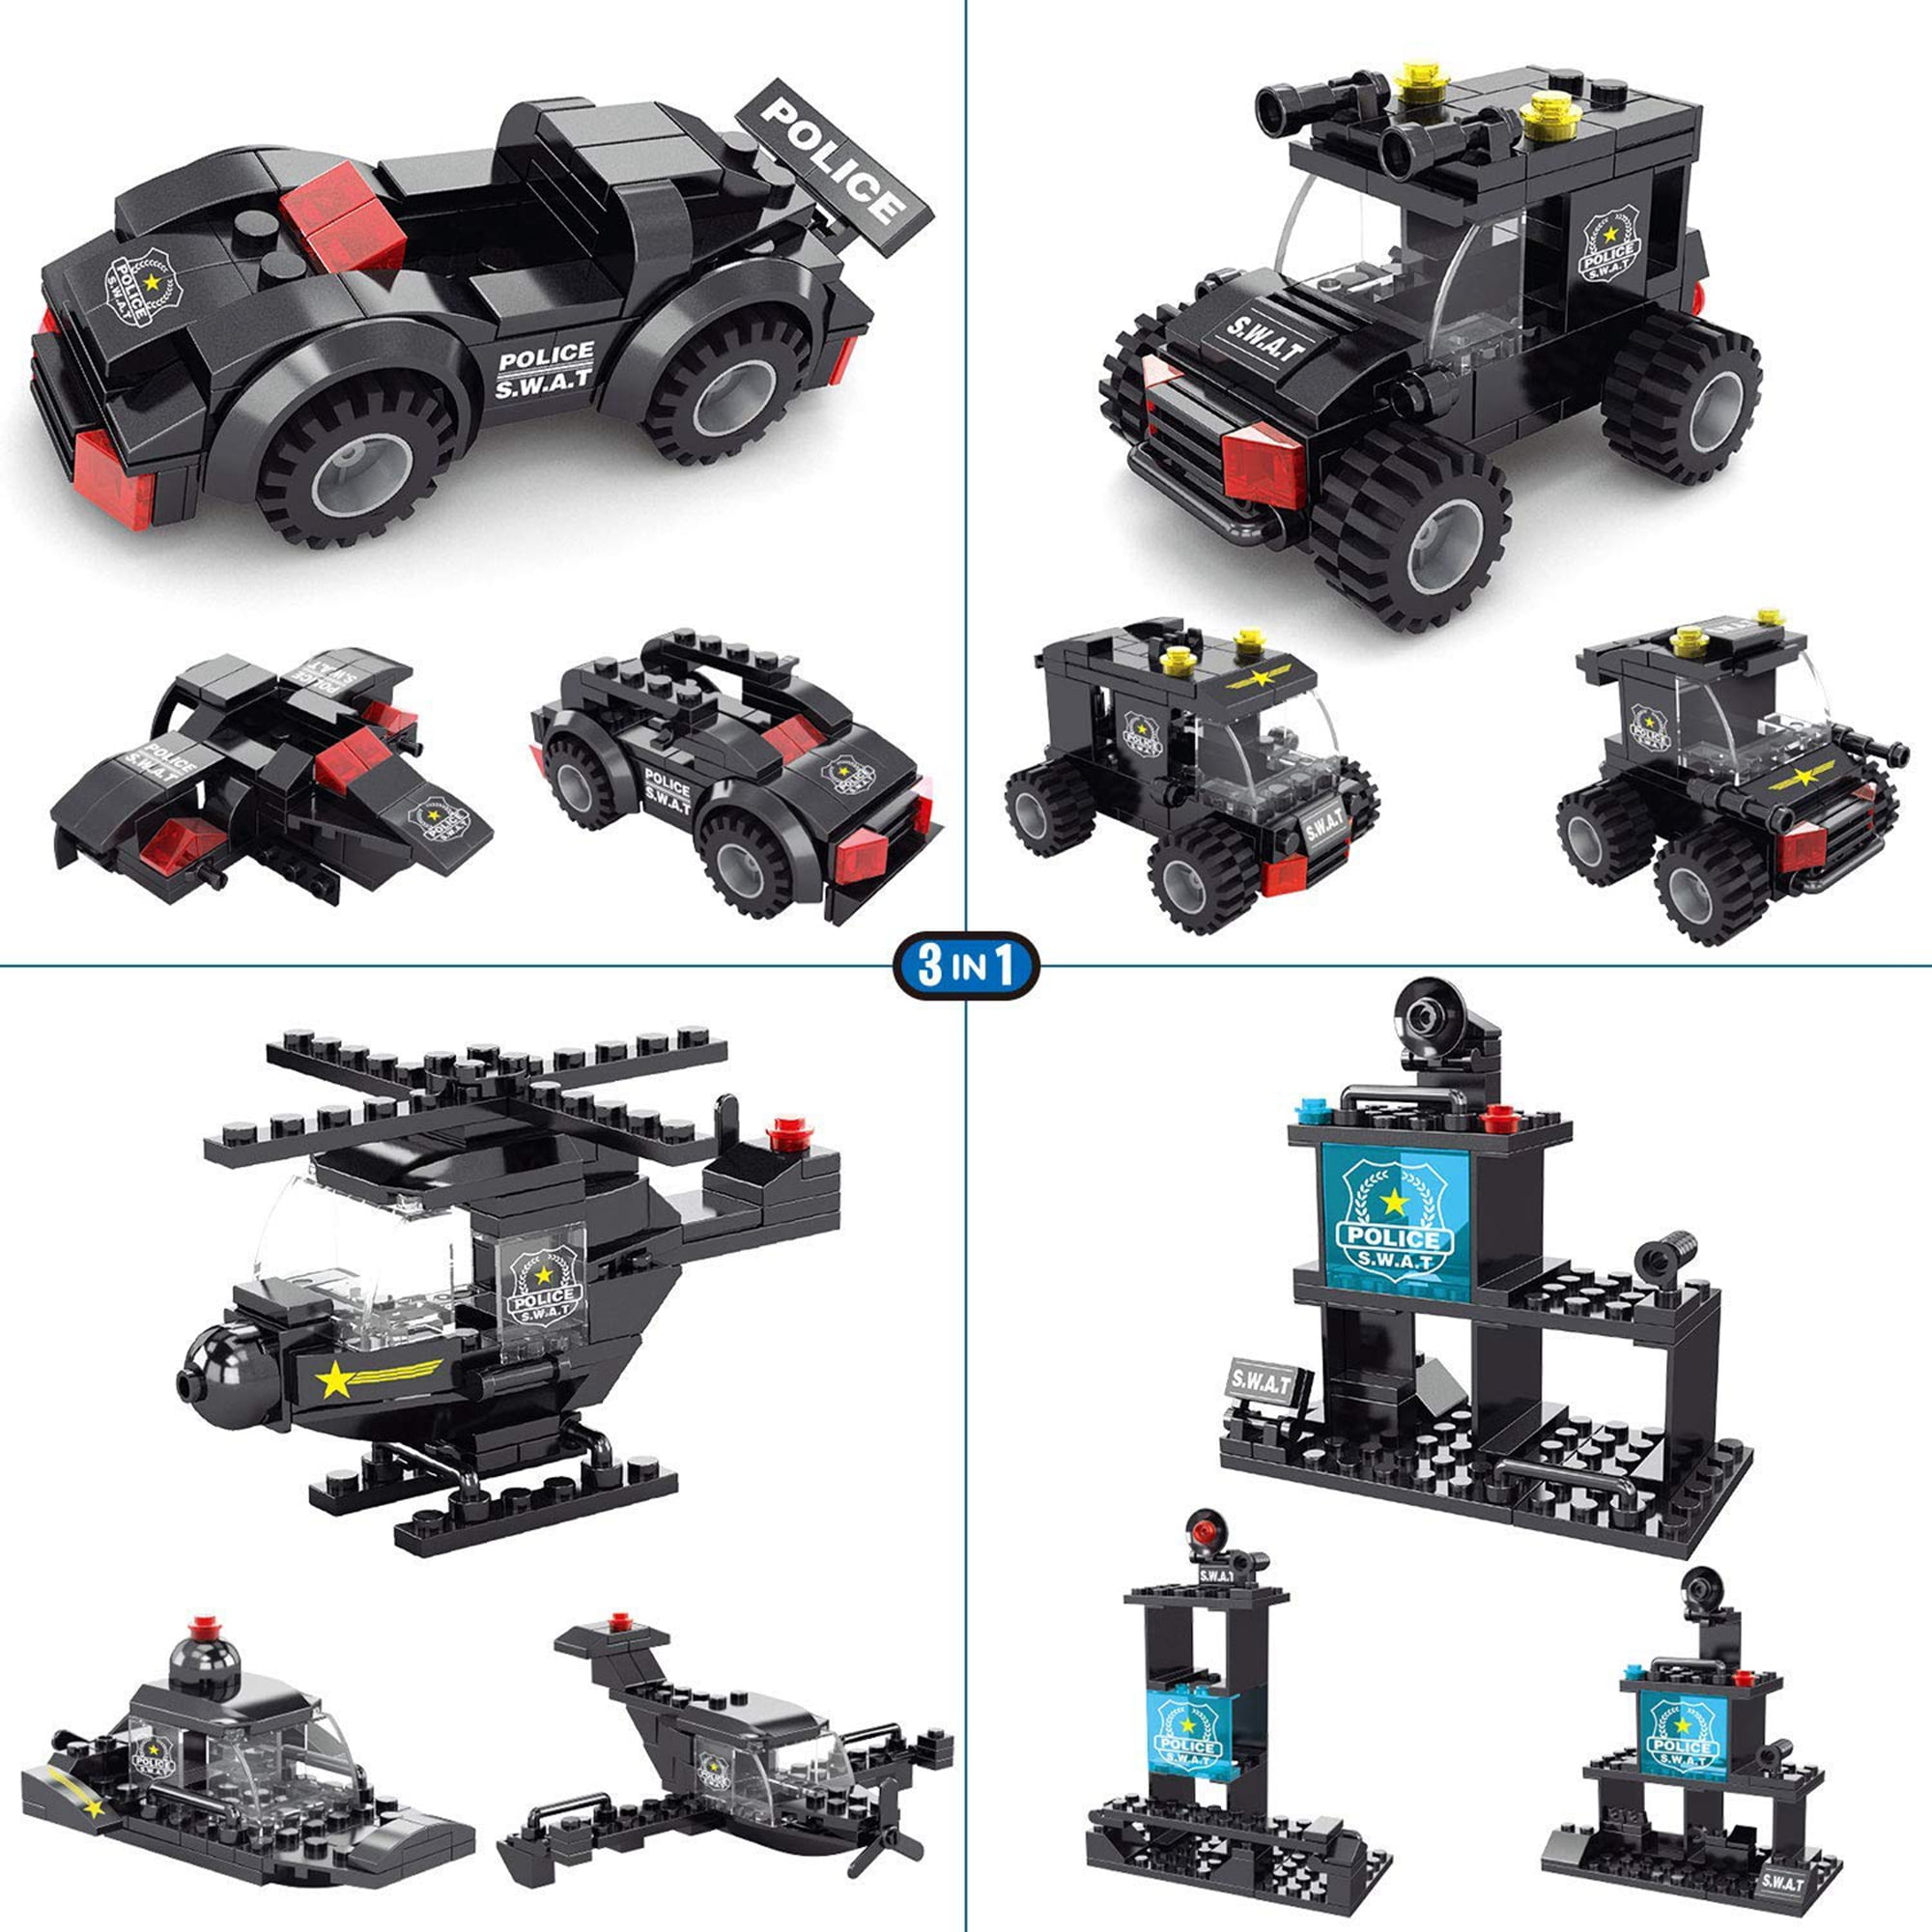 437 PCS Police SWAT Command Vehicle uniforms Fit Lego Building Blocks Toys Gifts 